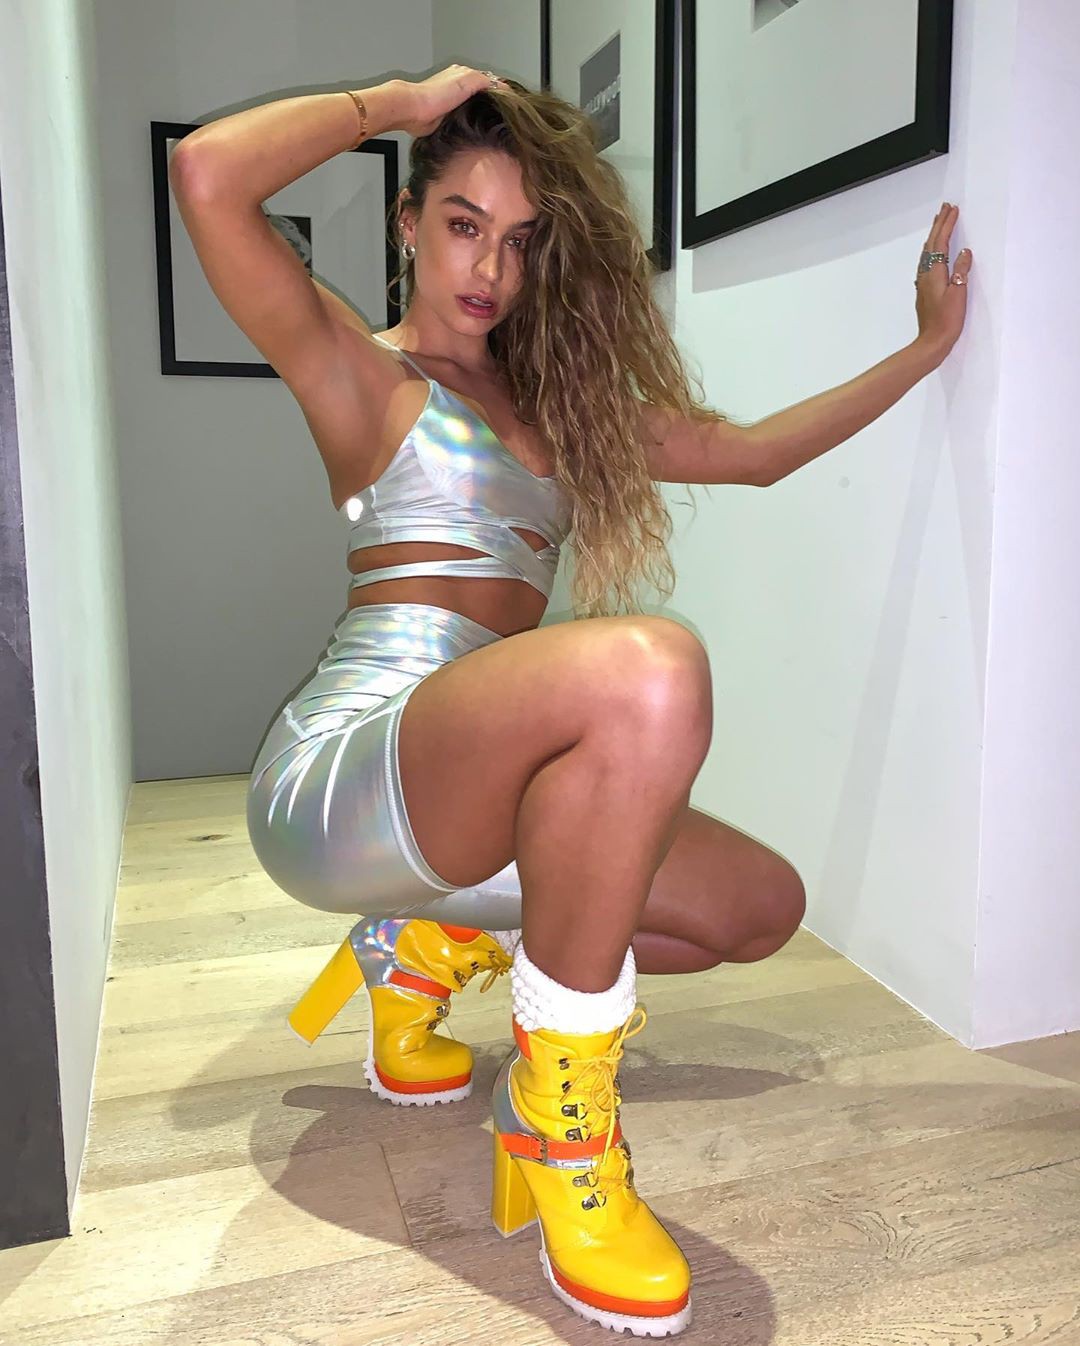 Hottest Work Out Sommer Ray Pics Insta: Sommer Ray,  Hot Instagram Models,  instagram models,  Instagram photos,  Hot Sommer Ray,  Instagram Sommer Ray,  Pretty Sommer Ray  